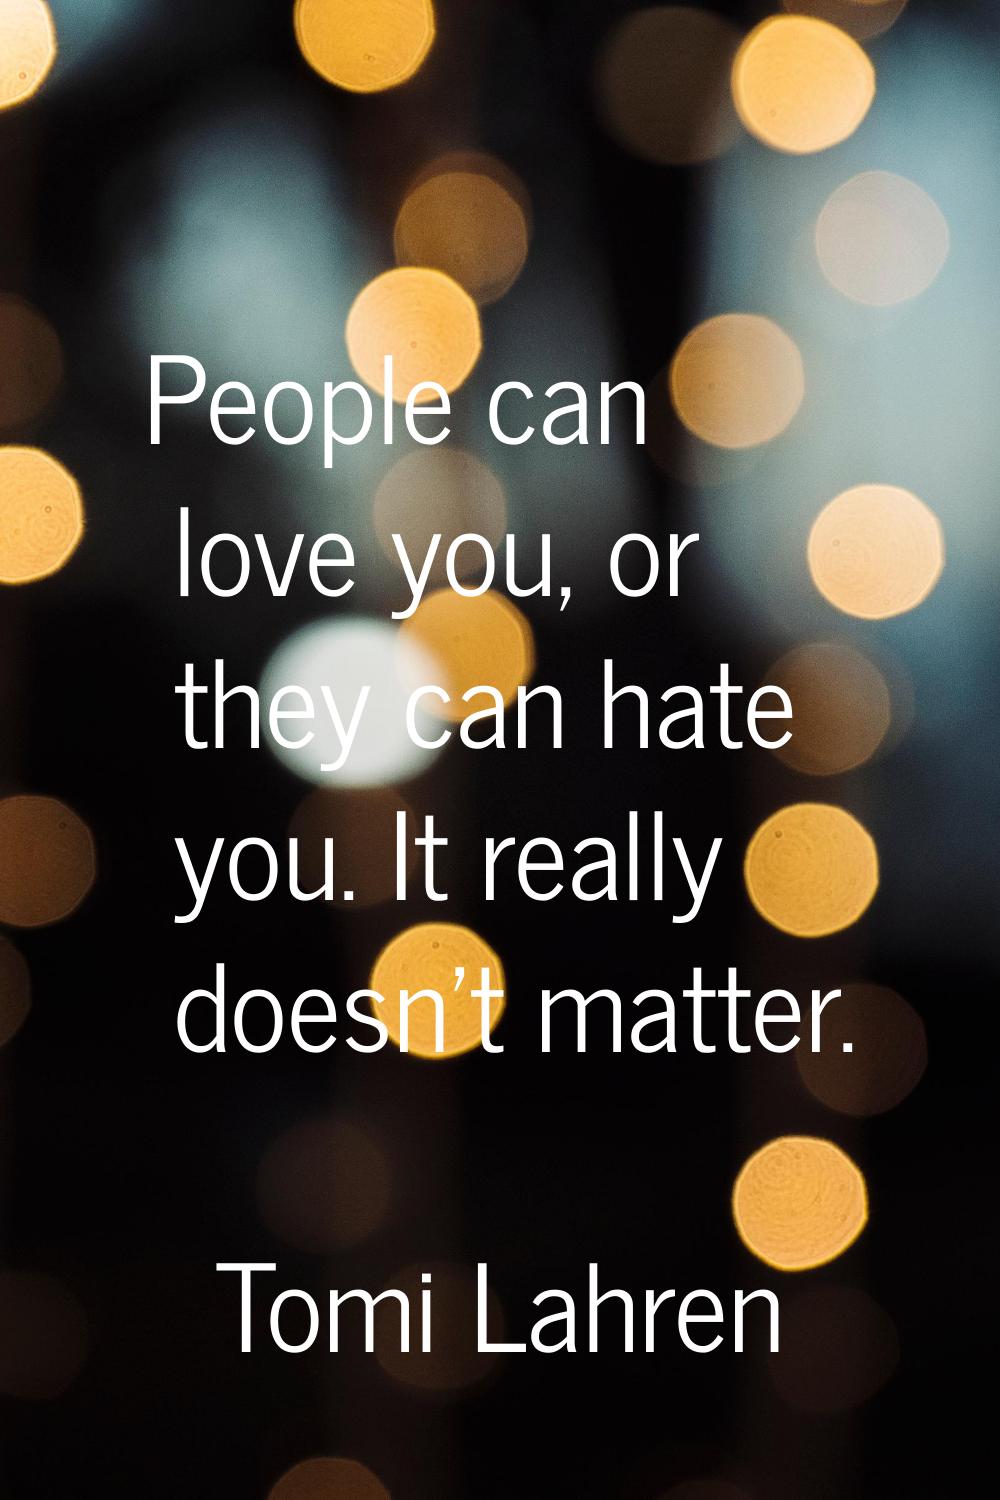 People can love you, or they can hate you. It really doesn't matter.